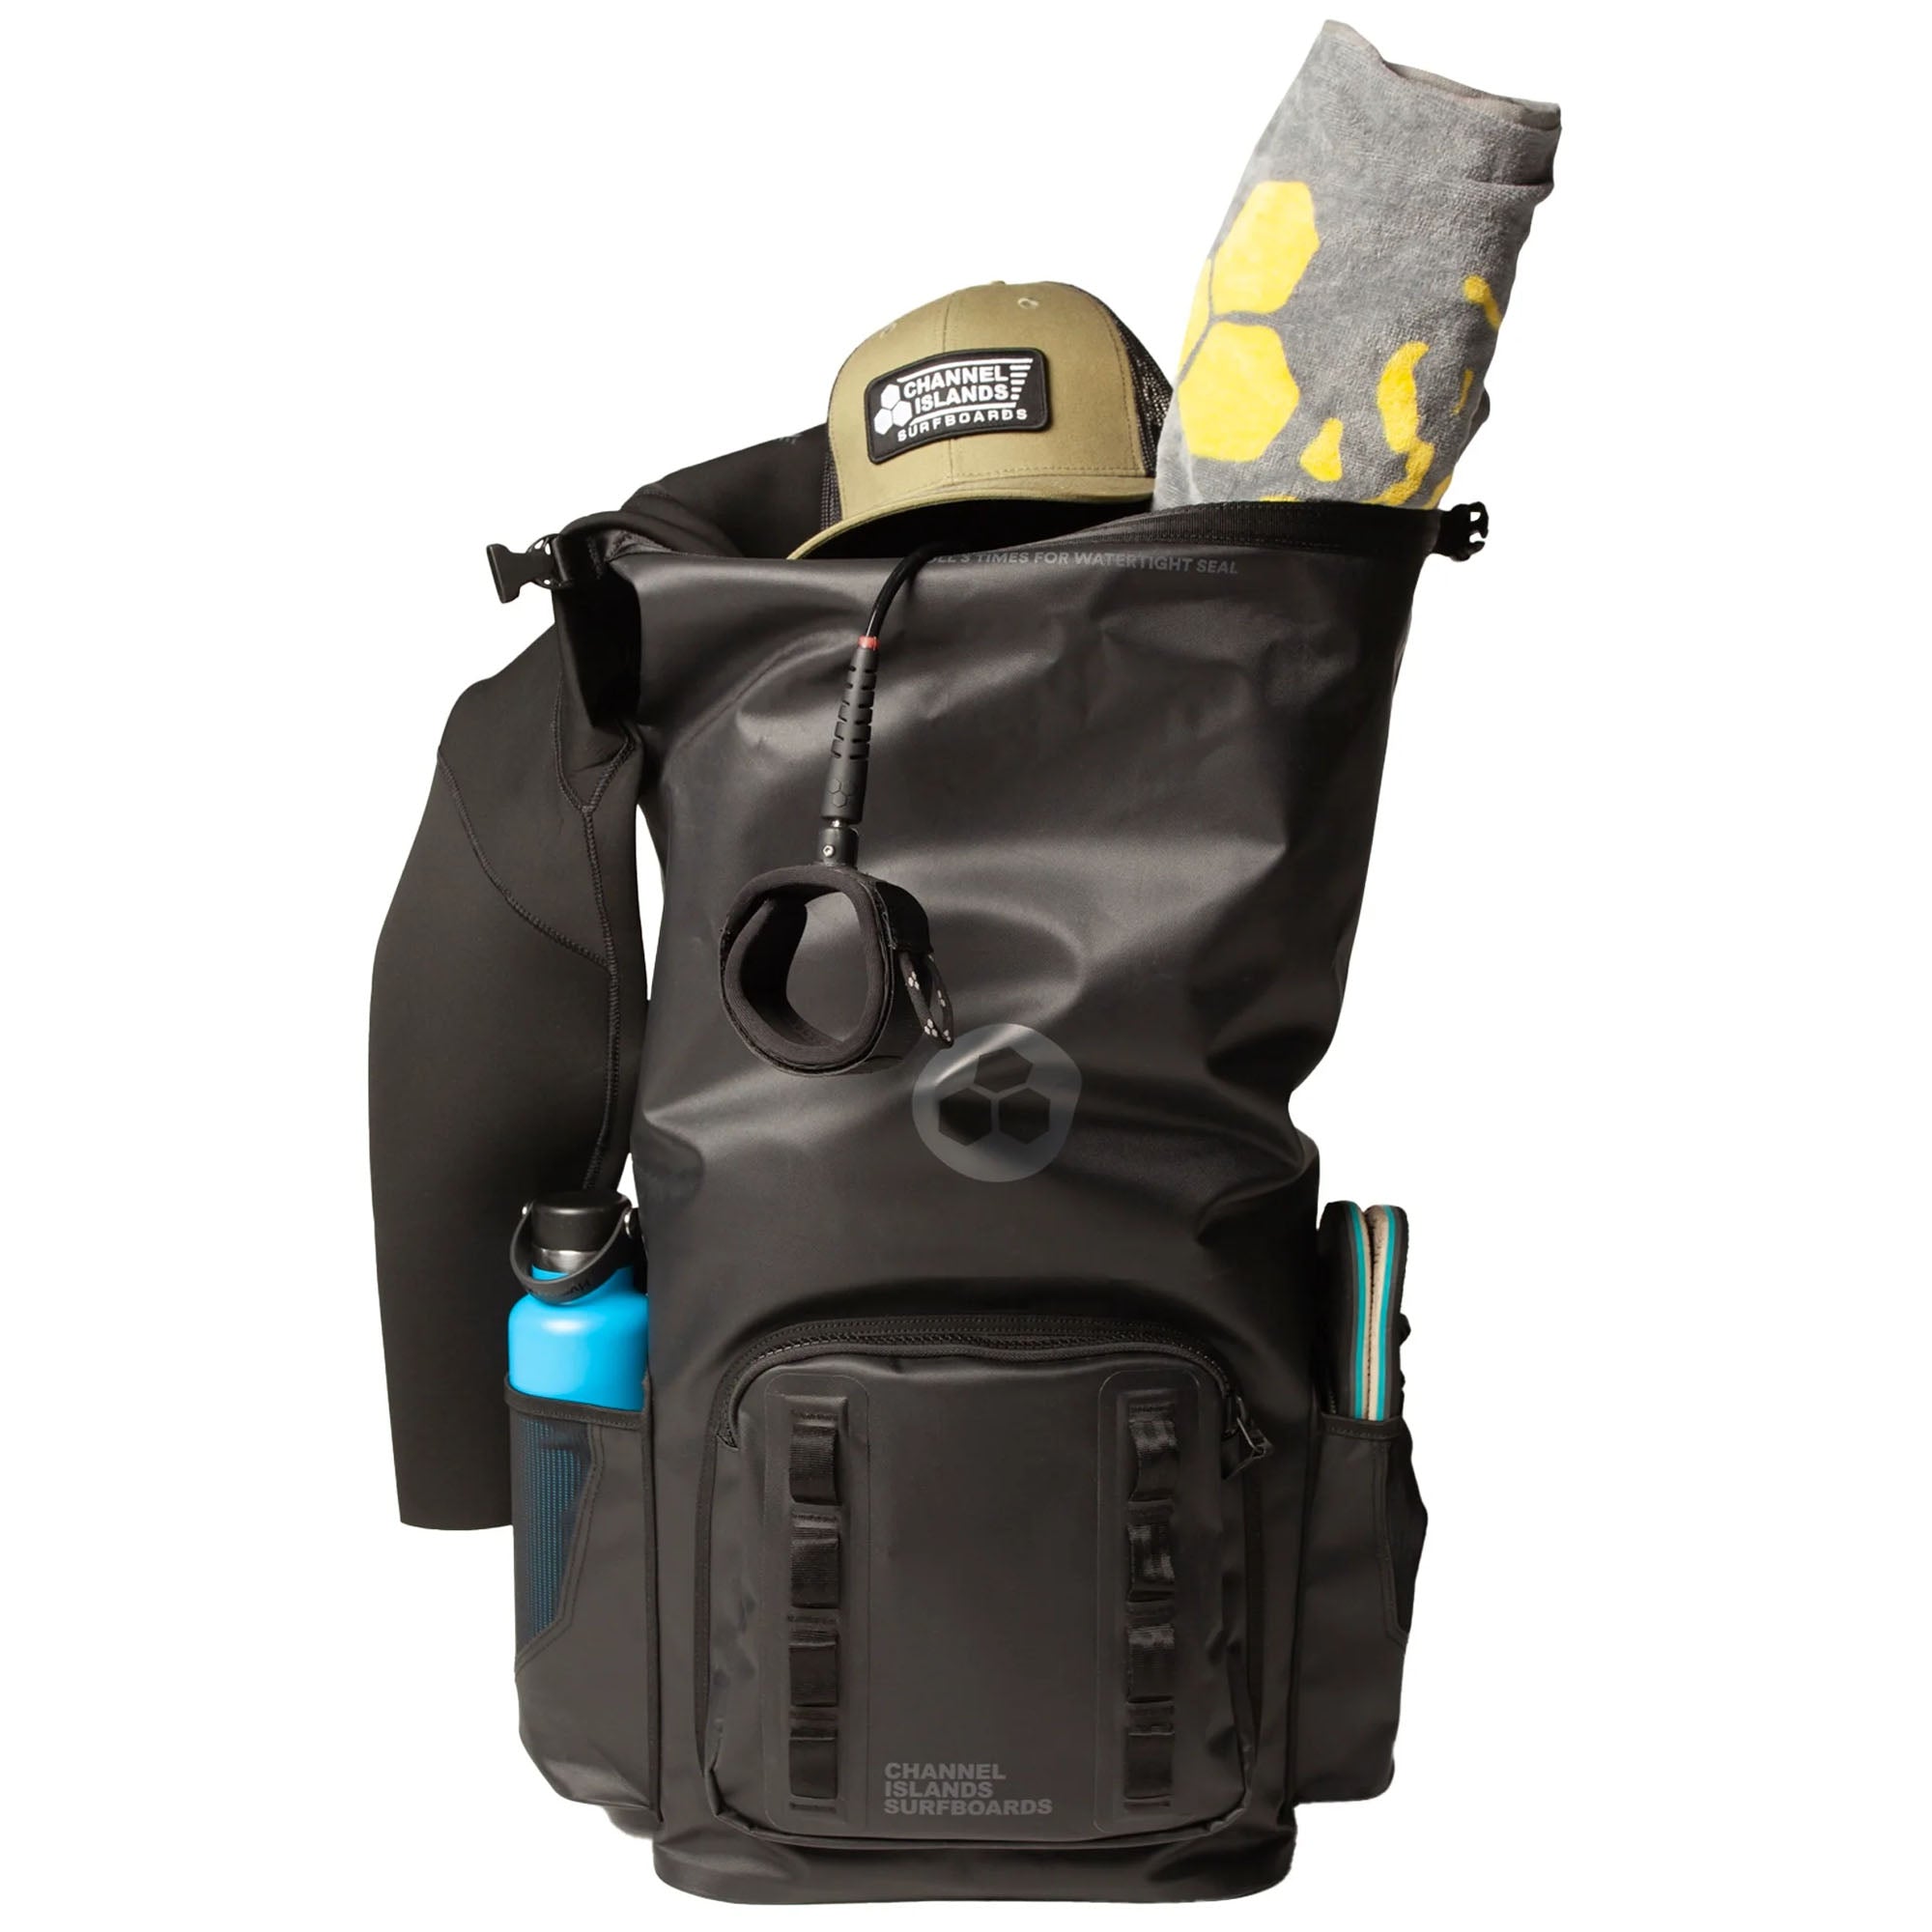 Channel Islands Dry Pack 35L Bag